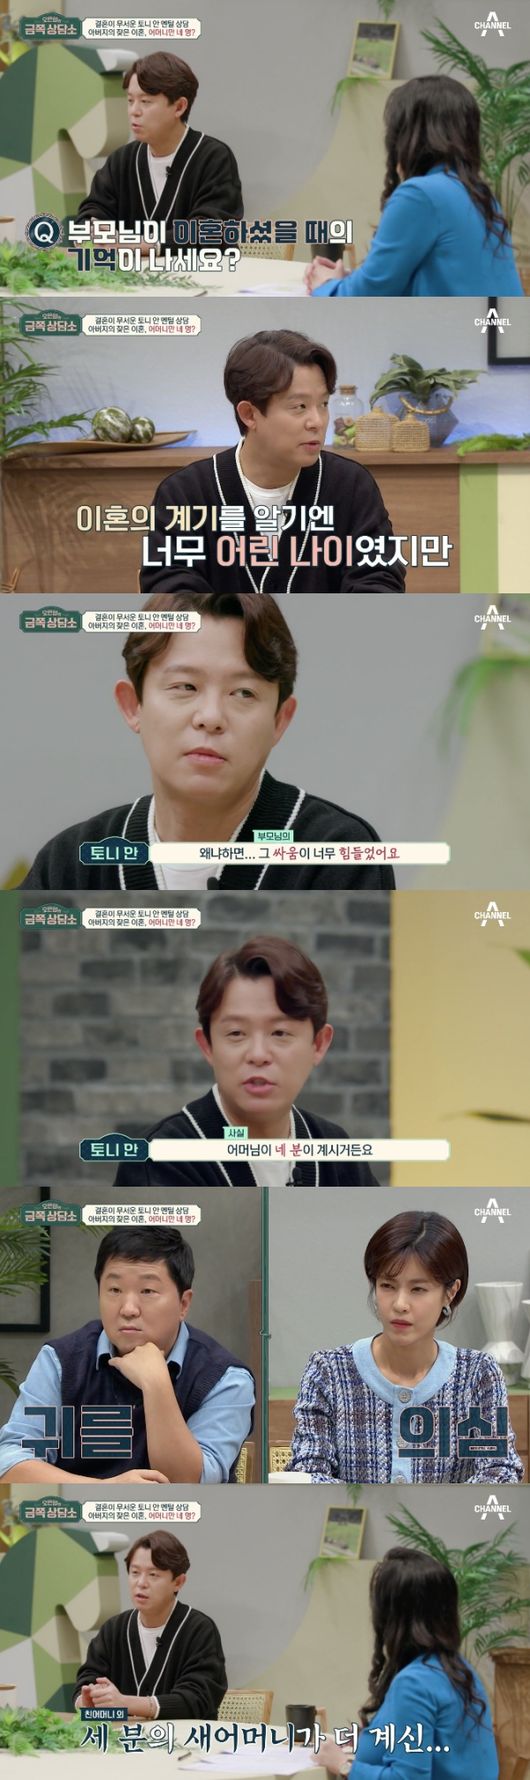 Tony Ahn has released a family history that has four Mothers as his fathers frequent divorce.Tony Ahn, a native of H.O.T, appeared as a guest in the channel A entertainment show Oh Eun Youngs Gold Counseling Center which was broadcast on the afternoon of the 29th.Tony Ahn was born in 1978 and is 44 years old in Korea this year. He is a lonely person who dreams of a happy family, but he has not yet marriage.On this day, Tony Ahn consulted about the marriage, and Dr. Oh Eun Young asked Tony Ahn about the marriage value and asked parents marriage life.The values ​​of marriage are born by seeing parents. How was your parents marriage life?Tony Ahn said, My parents first gave me a duty when I was six years old. At that time, it was difficult to know the occasion of the duty.But I liked my parents divorce because it was so hard for them to fight, and I think they took it positively when they said they were really scared and separated.I was relieved that if you divorce, you might not see any more fighting. In particular, Tony Ahn said, In fact, I have four Mothers.There are three other mothers besides the mother. After the parents divorce, I lived with Mother at first and lived with my father because of Mother.And I emigrated to the United States with my sister, and at that time my father had already given me a second divorce. Due to the unexpected Confessions of Tony Ahn, fellow entertainers such as Dr. Oh Eun Young, Jung Hyung Don, Park Narae and Lee Yoonji who watched were also surprised.Tony Ahn said: I never really heard my father give a reason for the divorce (with Mothers) - I think I just accepted it.This is the new Mother, he said, Mother, from the very next day. I thought I should.I do not think the relationship between the new Mothers and my father was good, he said. I think the reason is because of alcohol.I do not want to see it, so I always ate dinner at my friends house after school and stayed at 10 pm and went home when my father was asleep. Above all, Tony Ahn had the biggest reason for fear of marriage because of his repeated divorce and remarriage in childhood.I thought that if I marriage, I would not be like my father, he said. I was sorry for all the unfortunate family history left by trauma.Oh Eun Youngs Gold Counseling Center captures broadcast screen